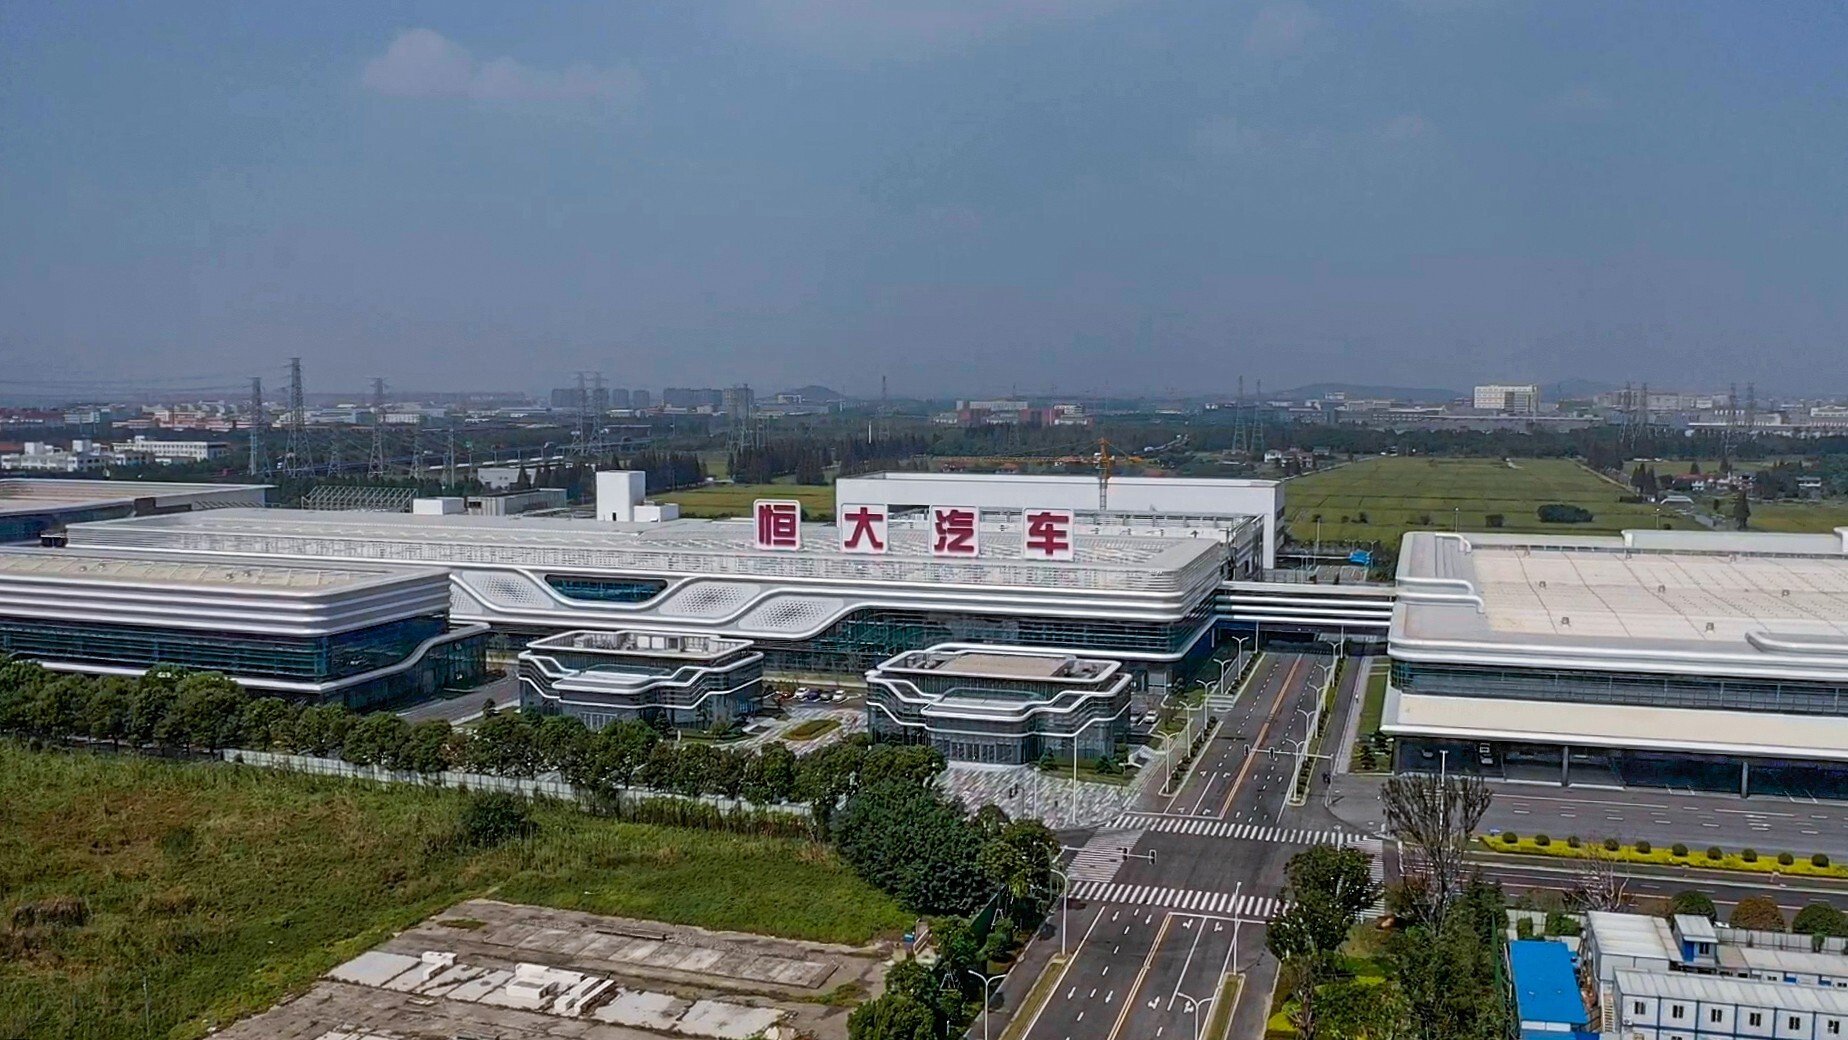 A view of Evergrande Auto’s factory in Songjiang district, Shanghai. Photo: Thomas Yau